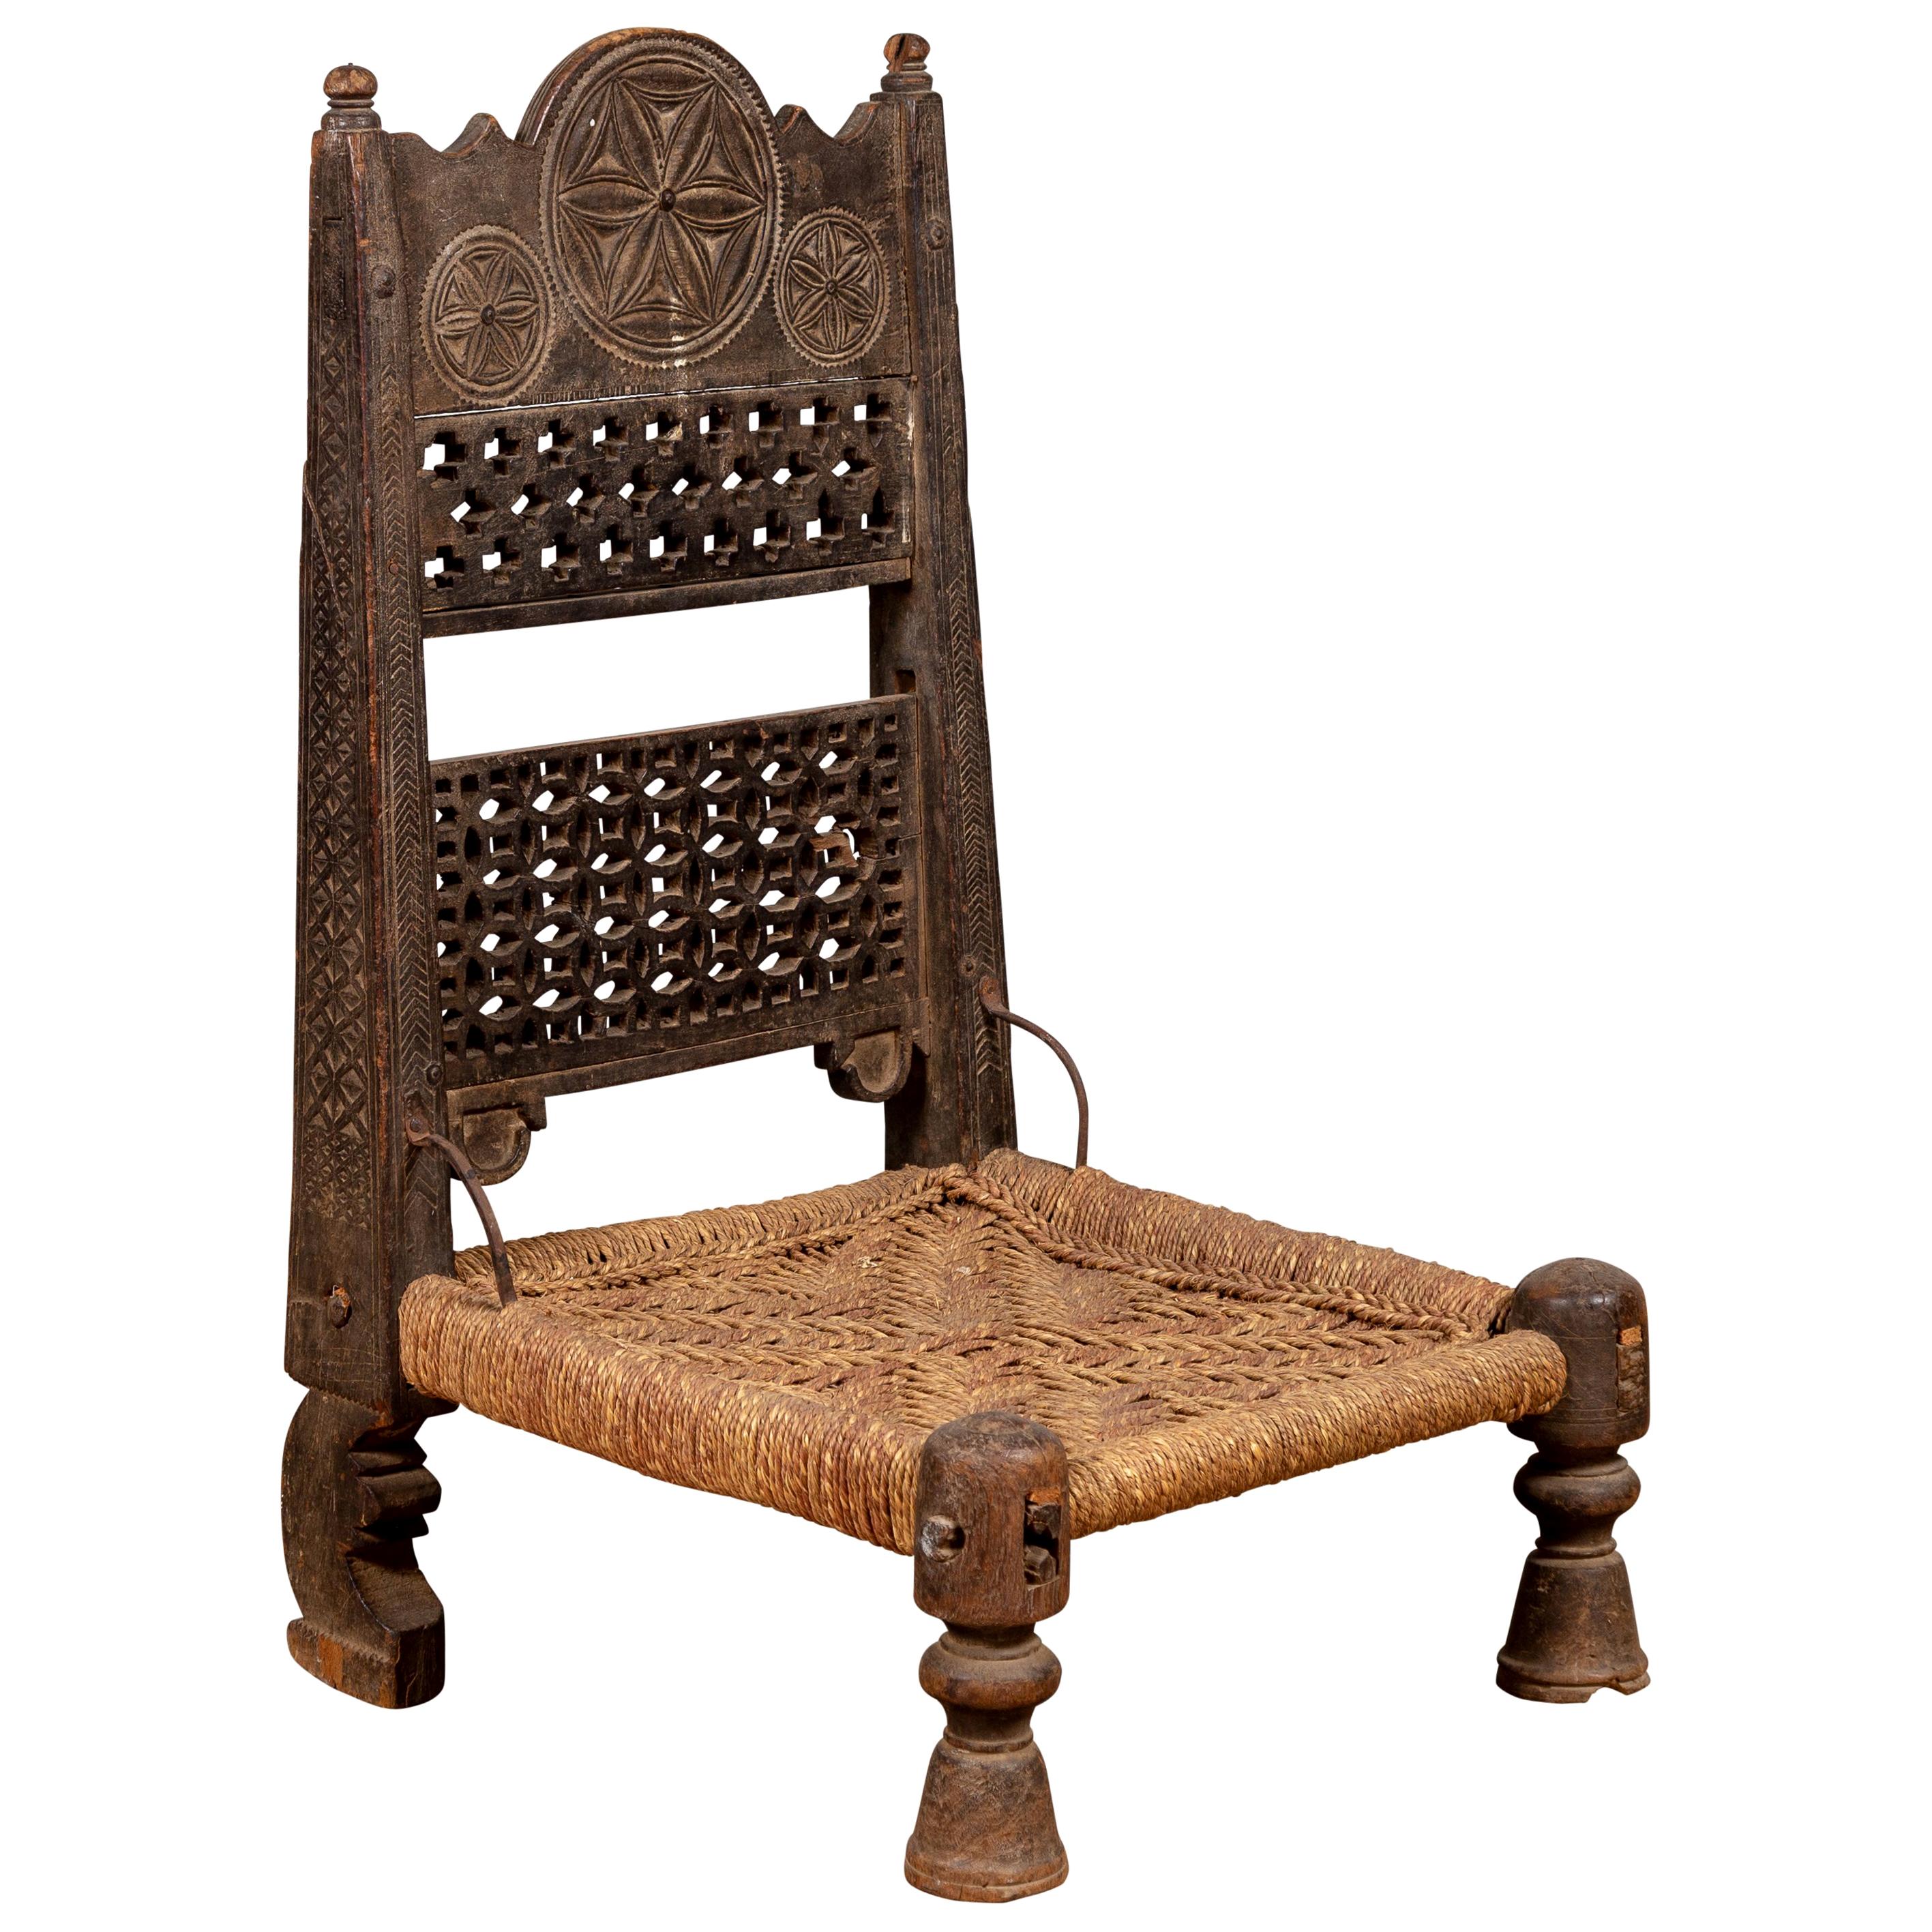 Antique Indian Rustic Low Seat Wooden Chair with Fretwork Accents and Rosettes For Sale